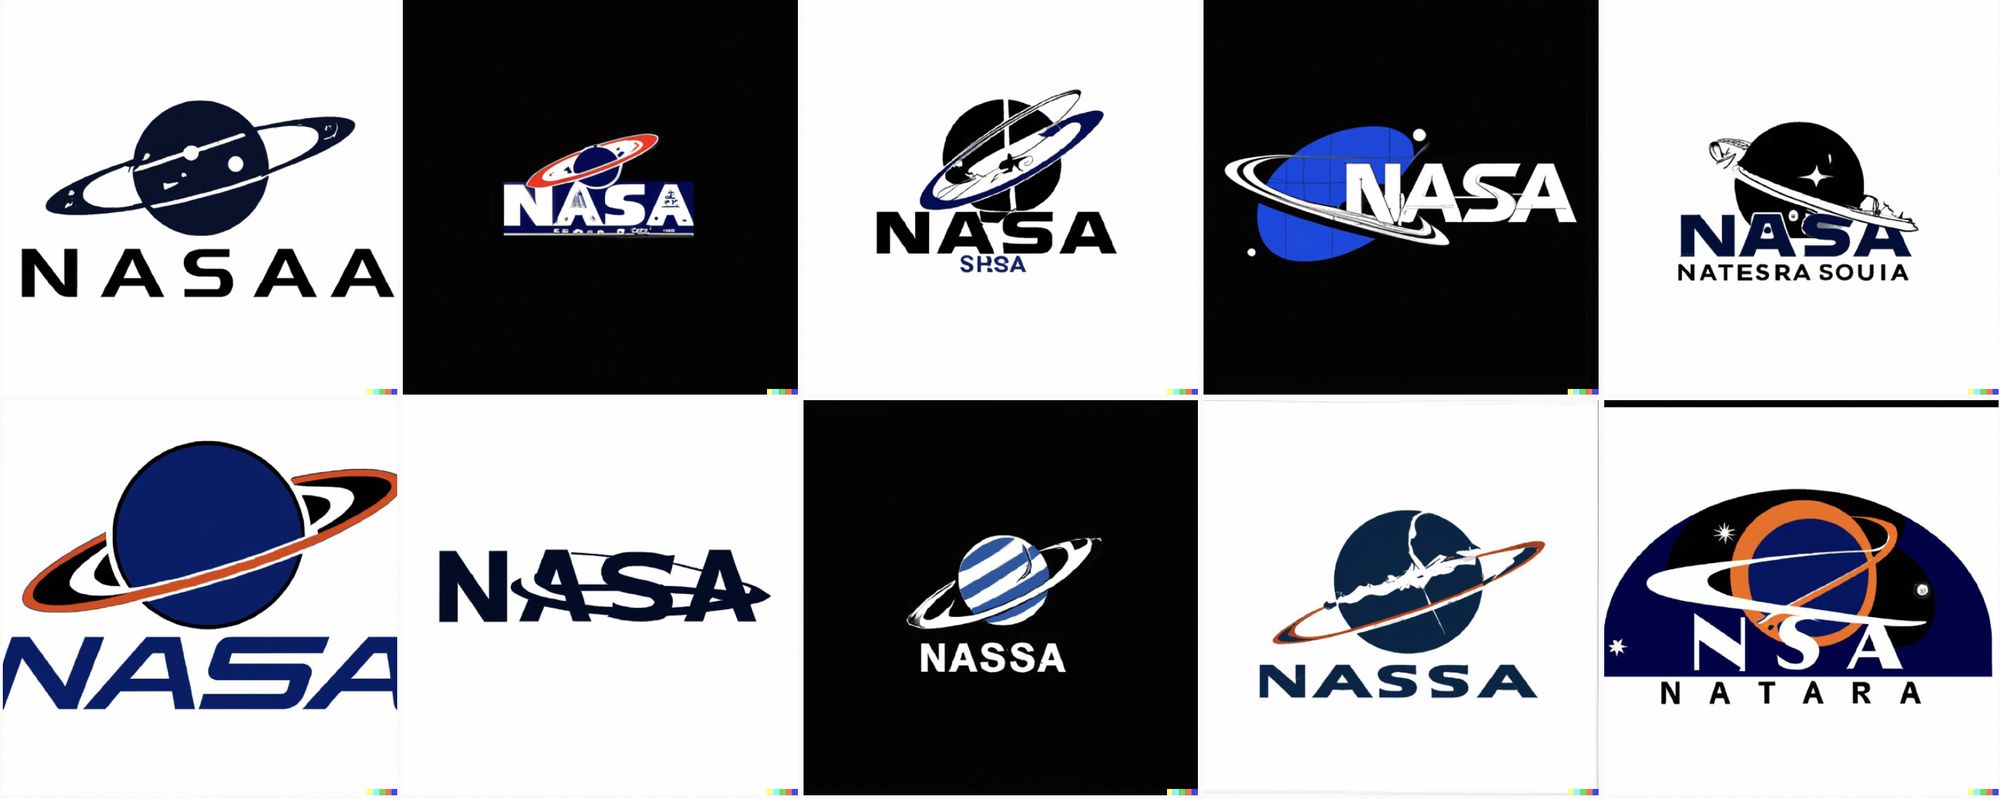 Black, red, and blue logos, featuring saturn and its rings. Text reads "nasaa" or "nassa" or even "nsa natara" and half of them read "nasa"